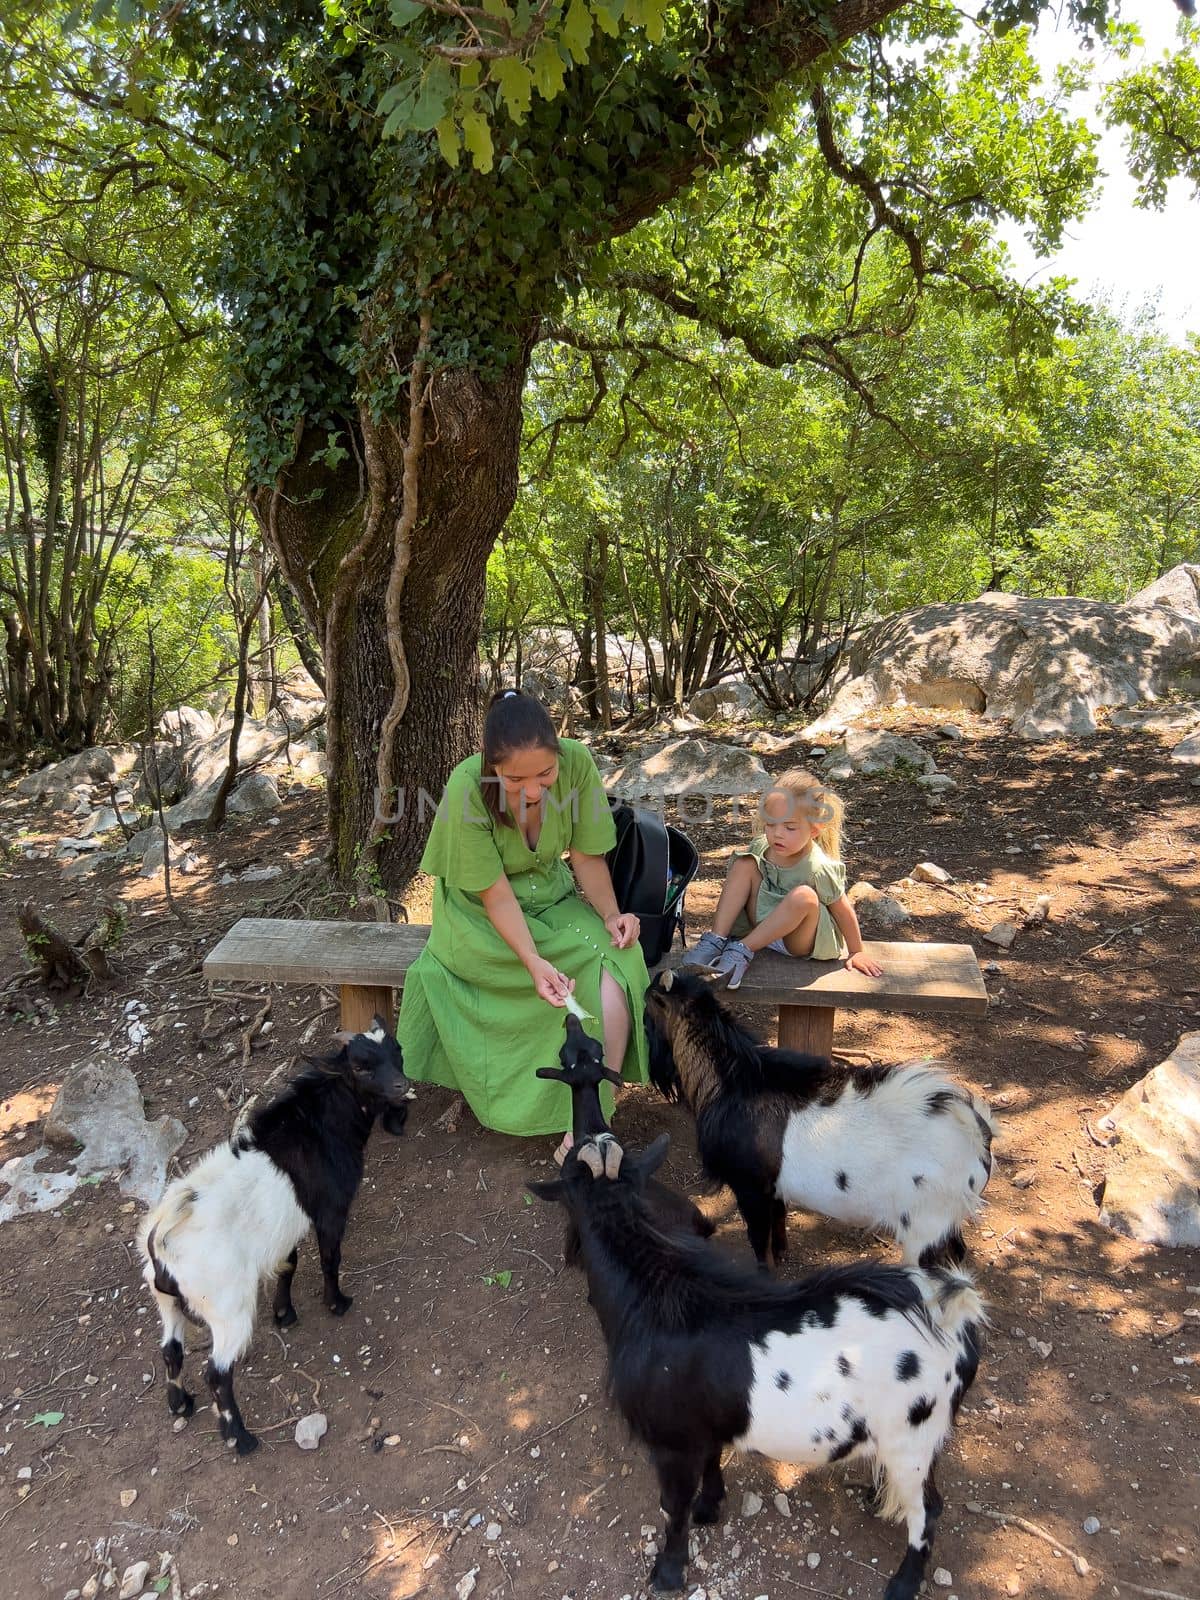 Mom and little girl are sitting on a bench and feeding goats. High quality photo